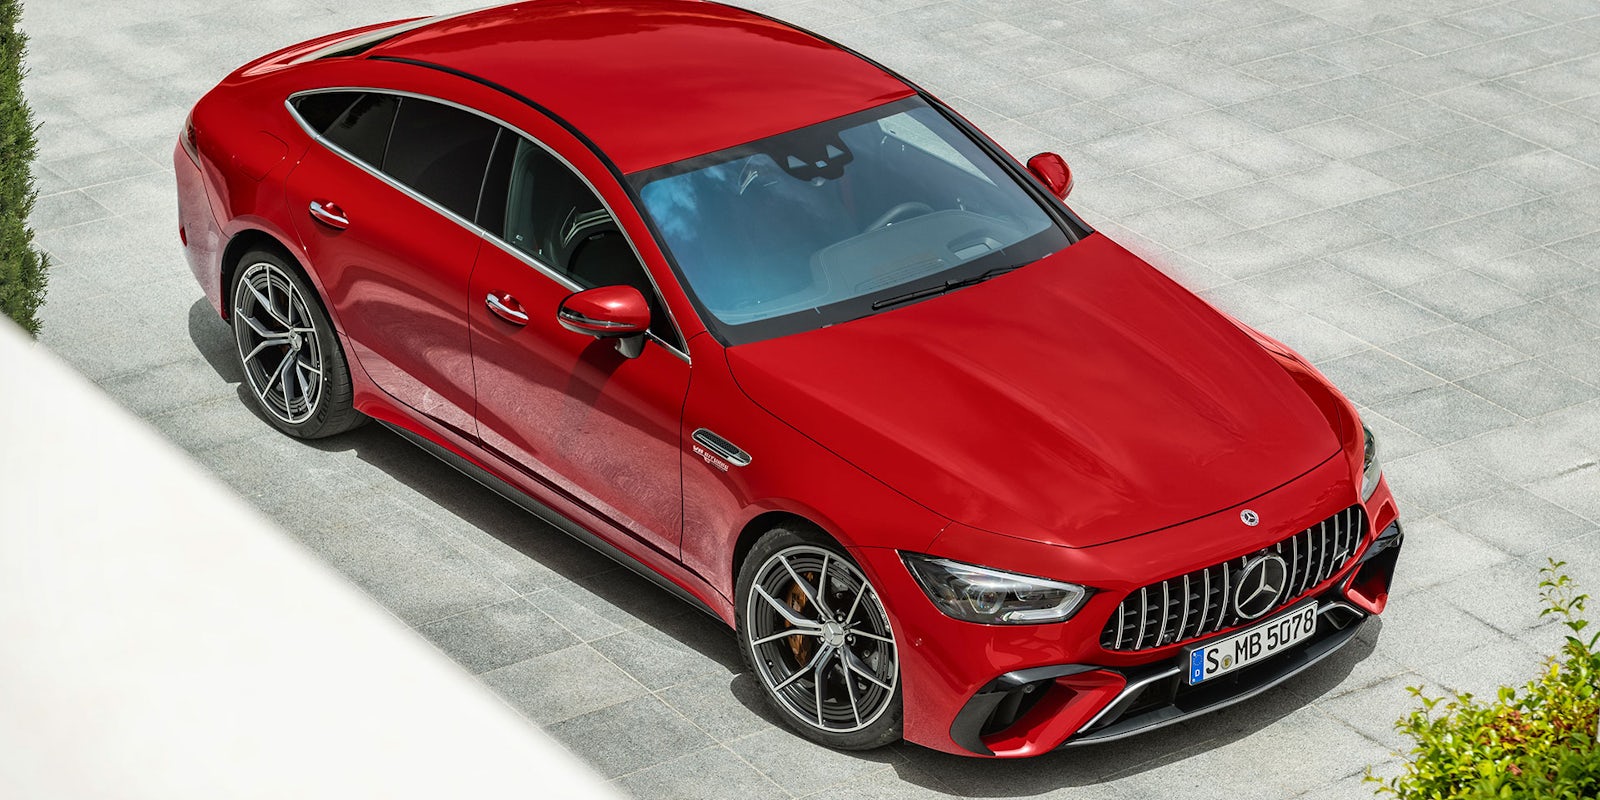 New 843hp Mercedes Amg Gt 63 S E Performance Hybrid Revealed Price Specs And Release Date Carwow